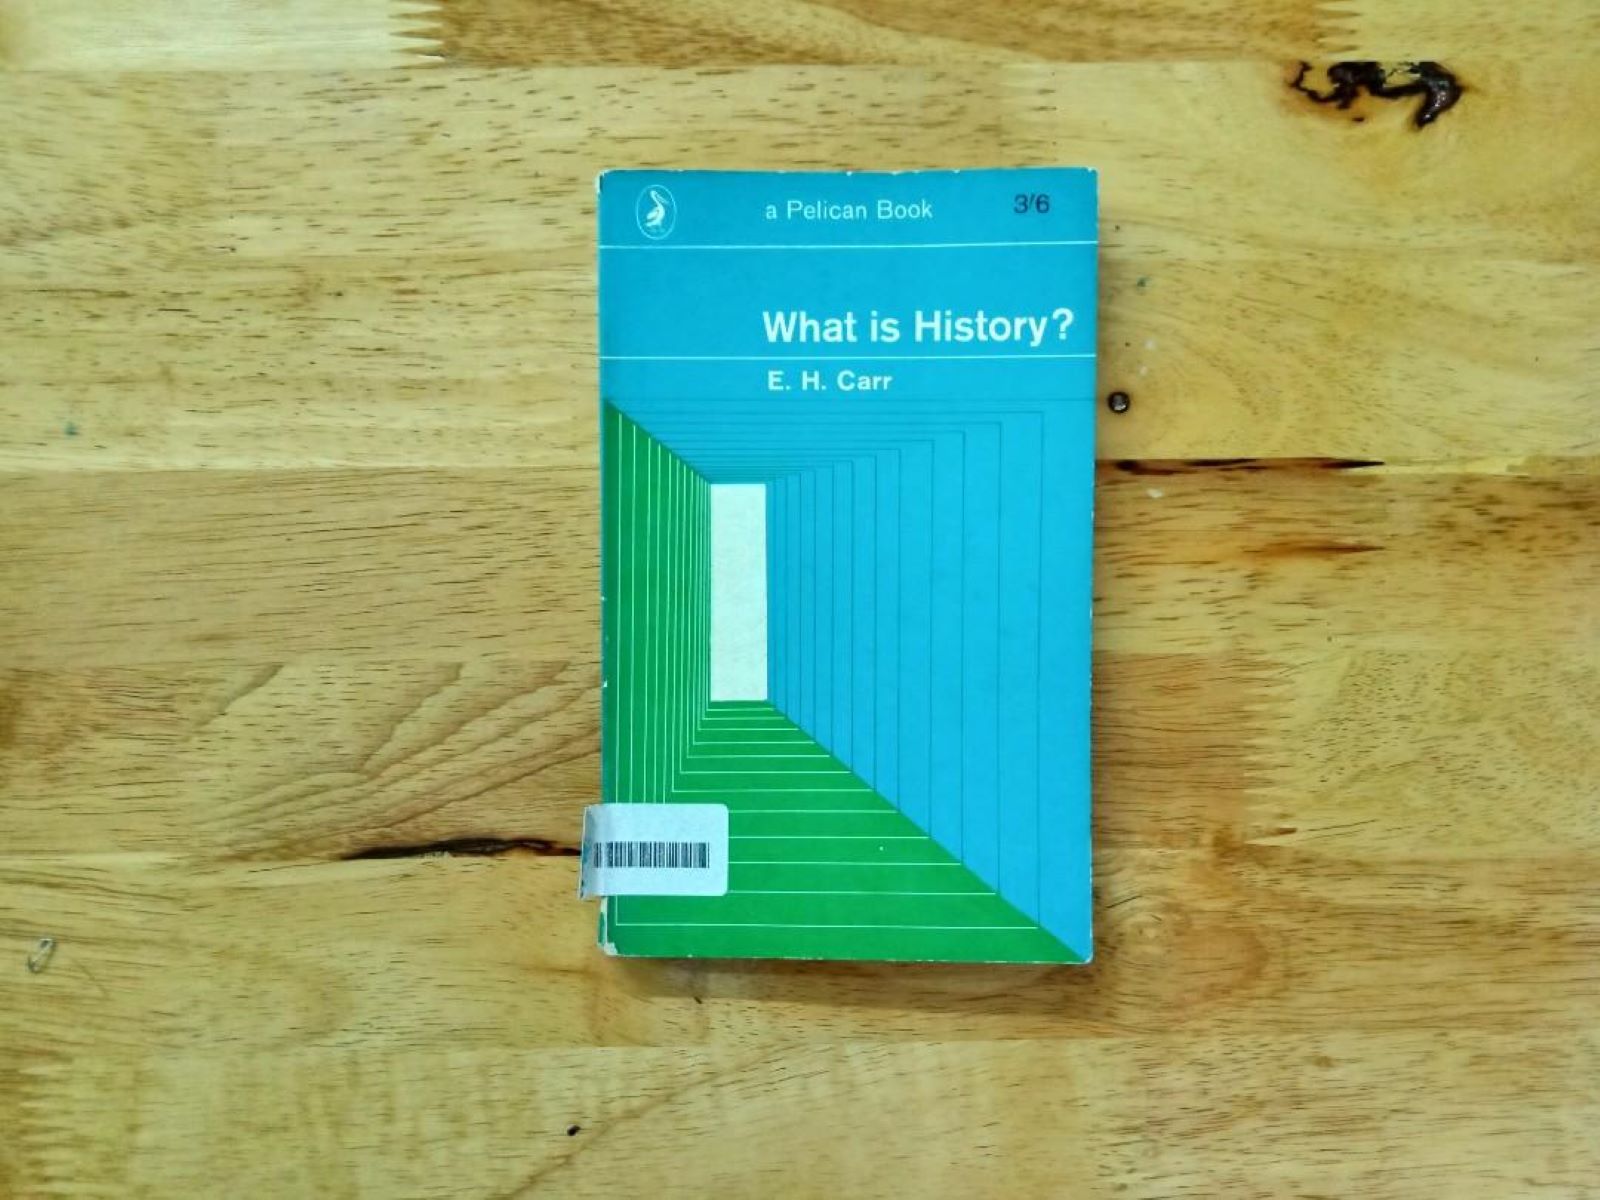 e-h-carr-what-is-history-ebook